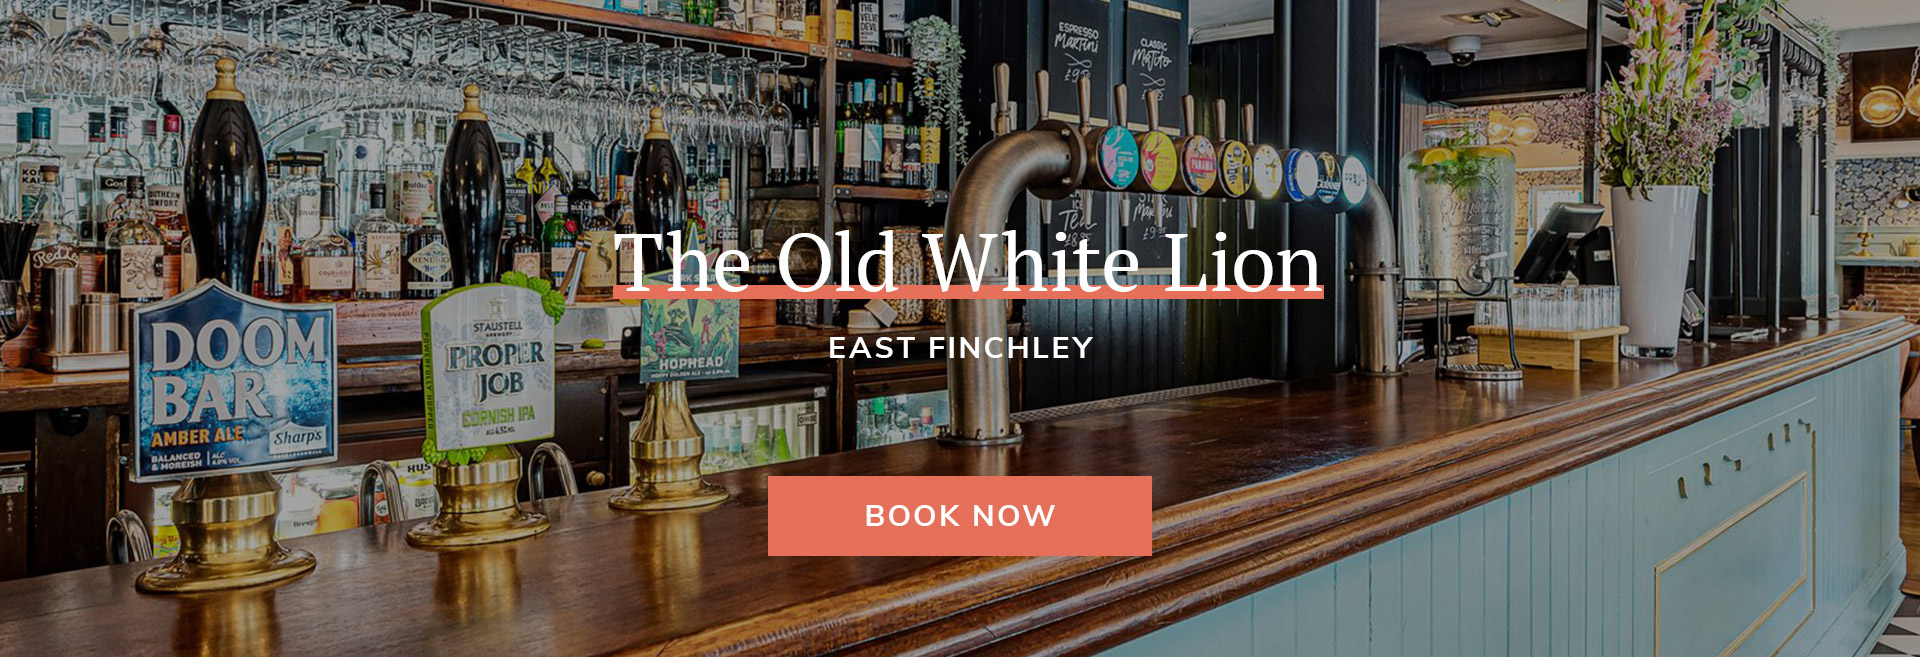 The Old White Lion Banner 2